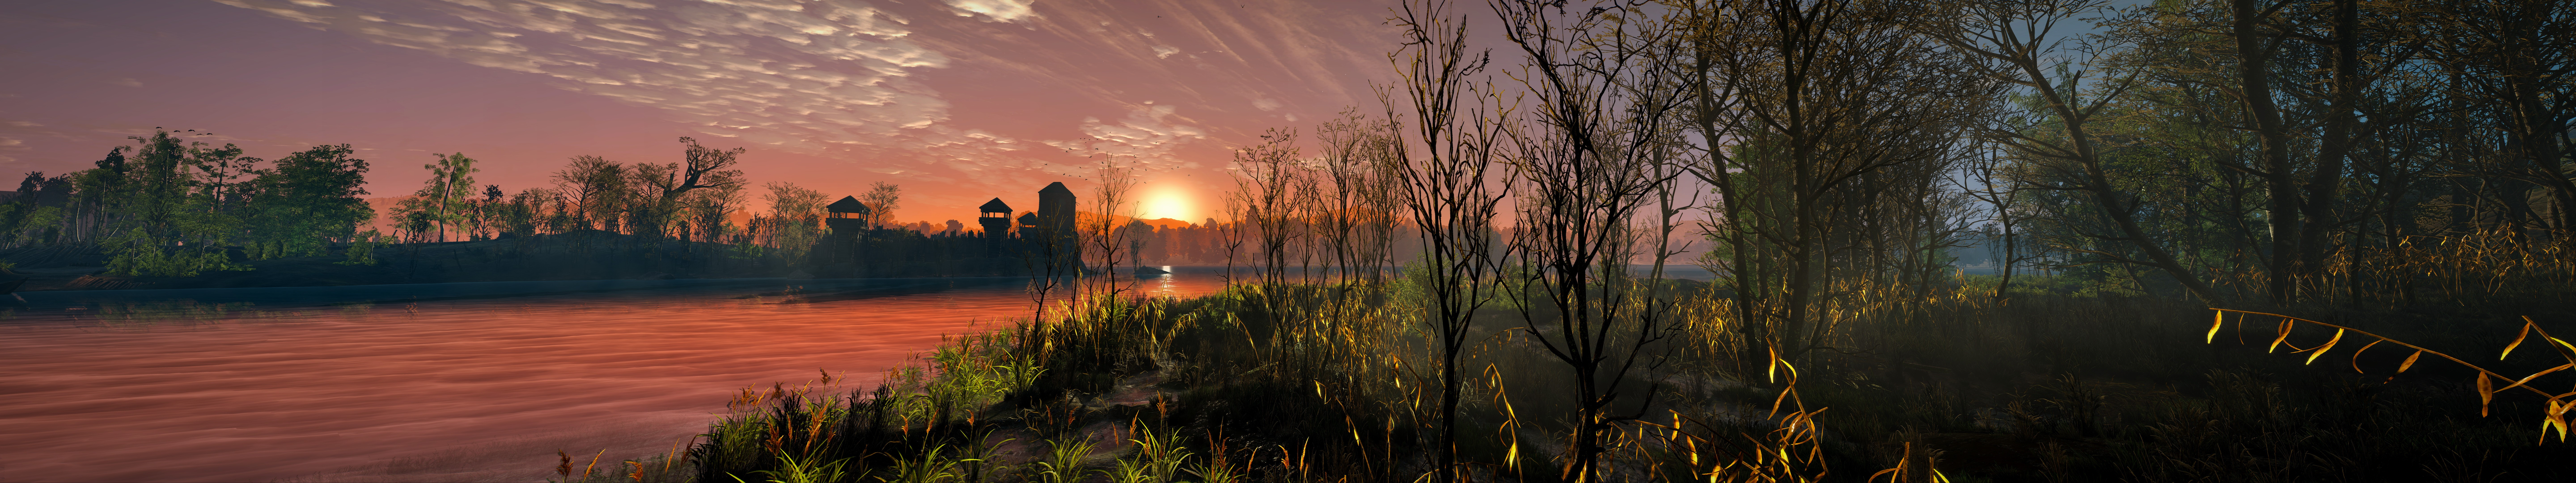 The Witcher The Witcher 3 Wild Hunt Nvidia Ansel Panoramas Velen 11520x2160